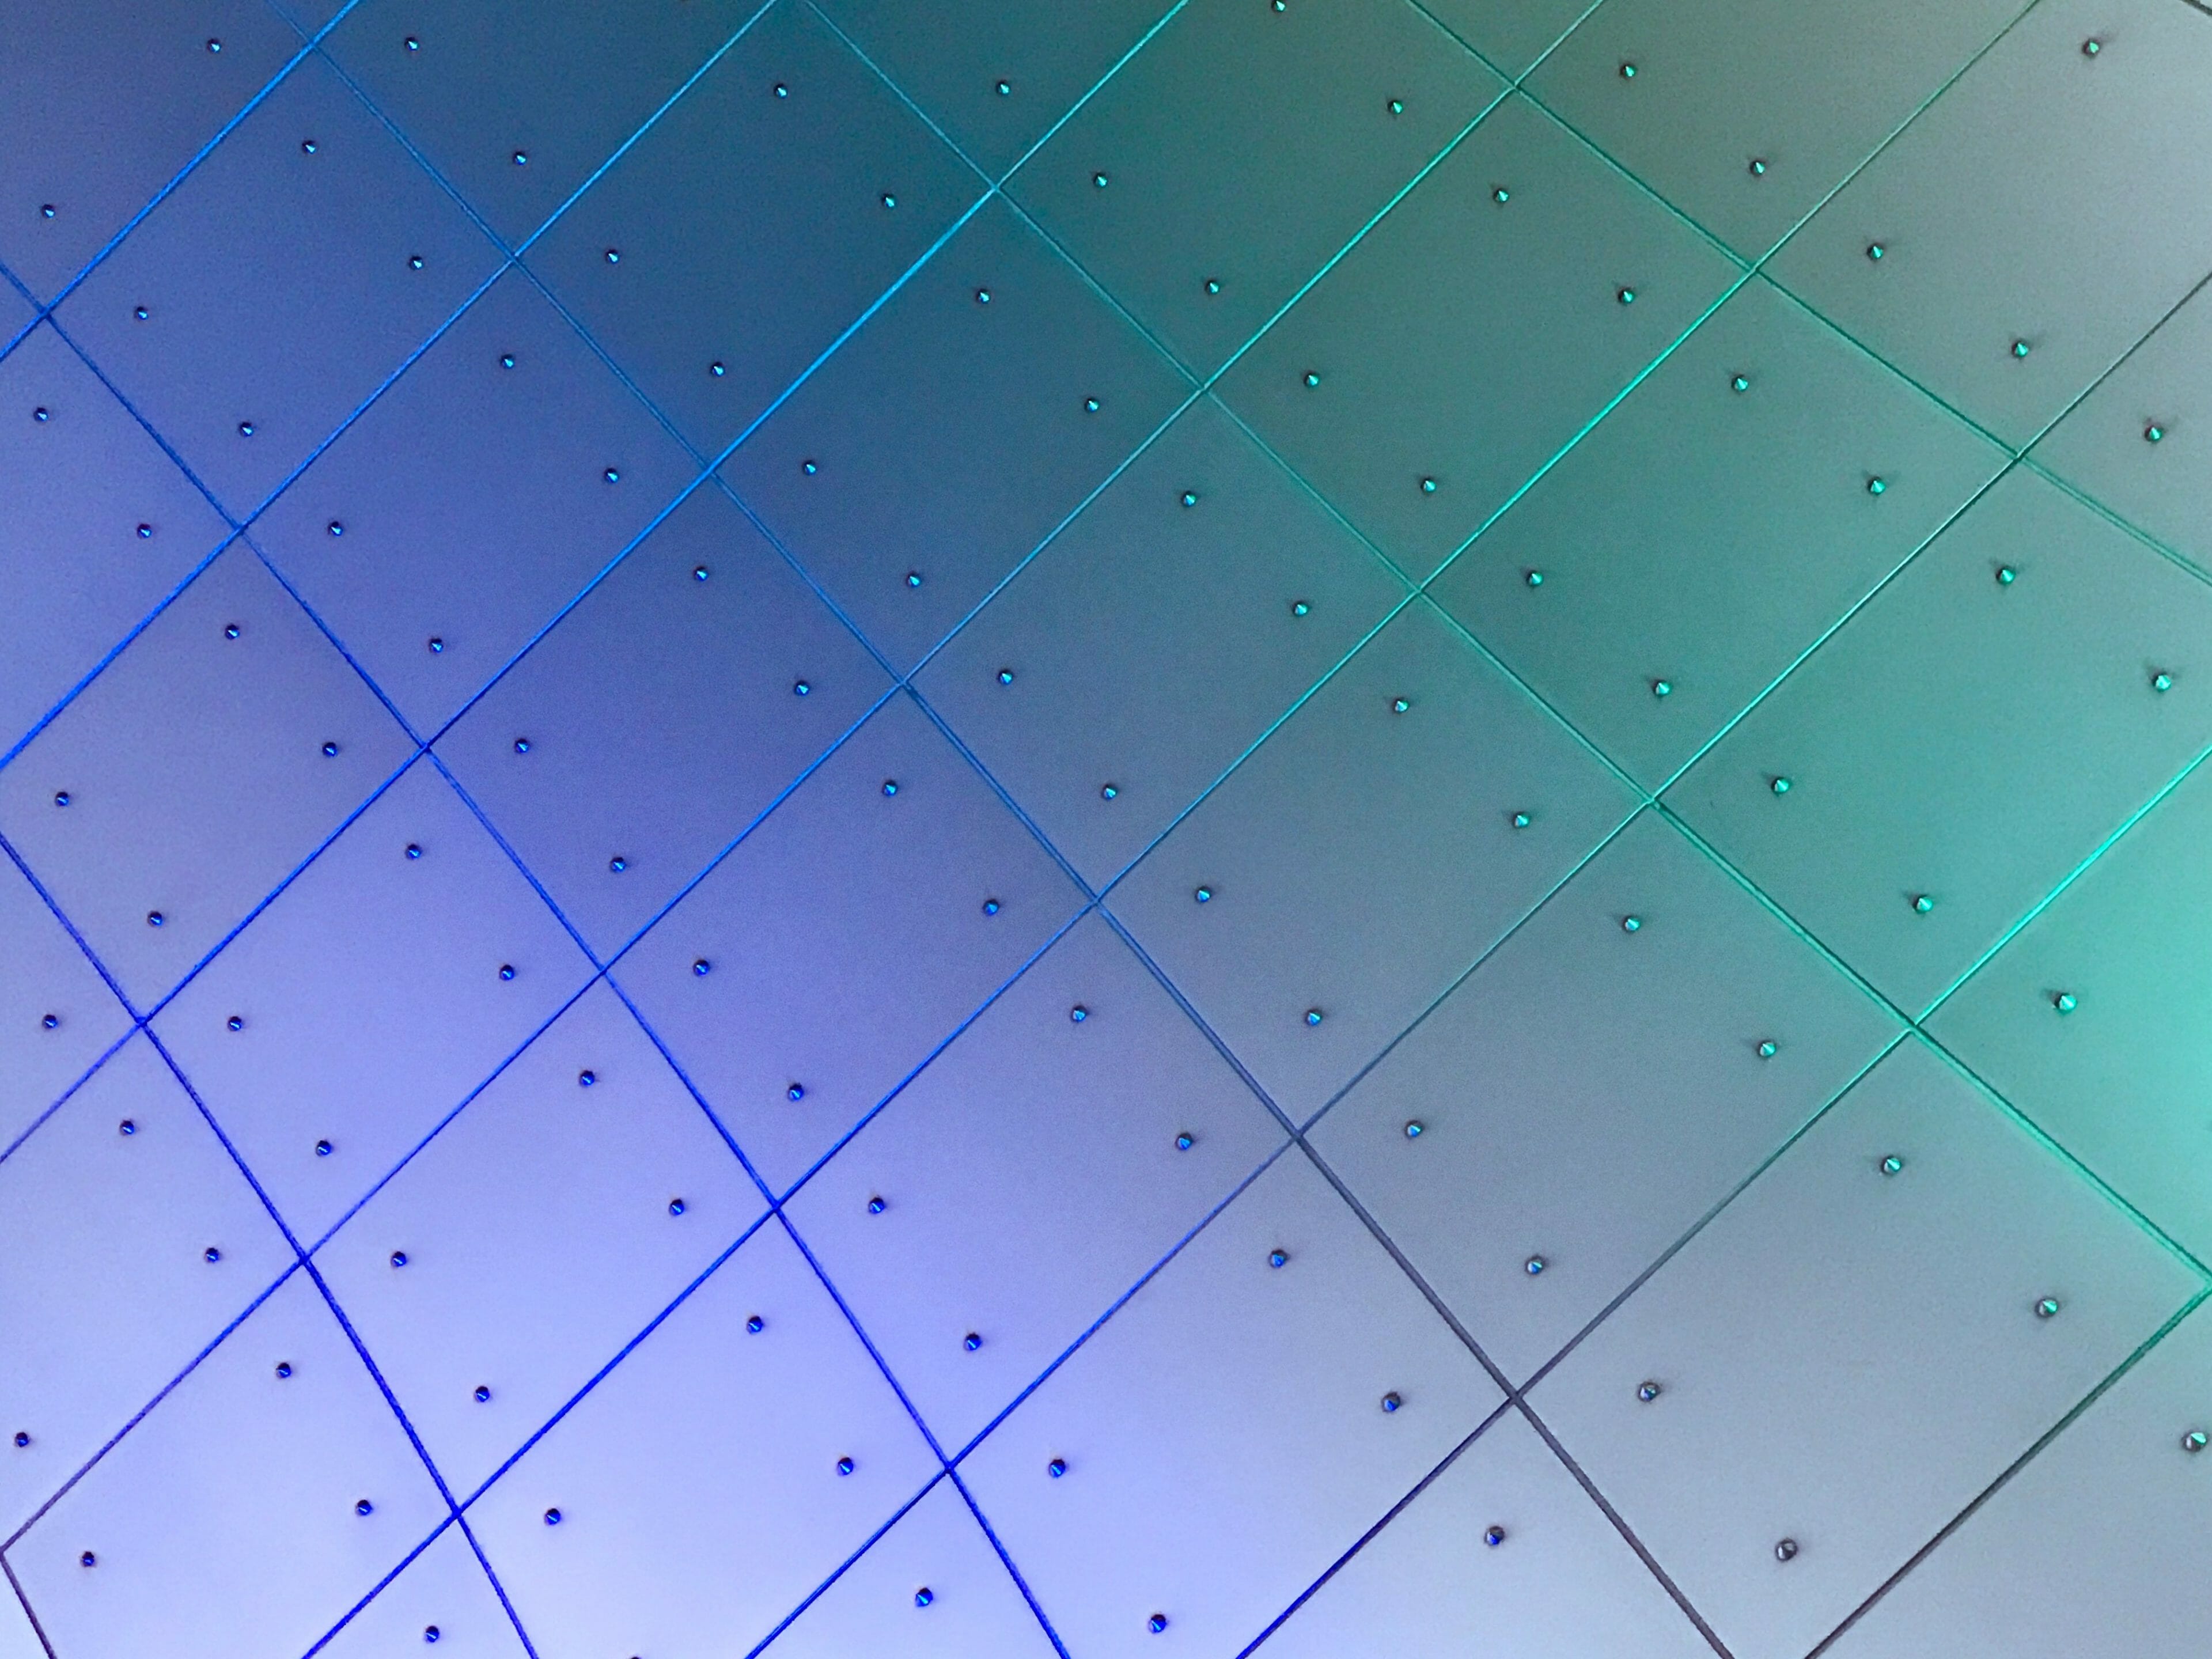 Abstract image of boxes with color gradient from purple/blue to green